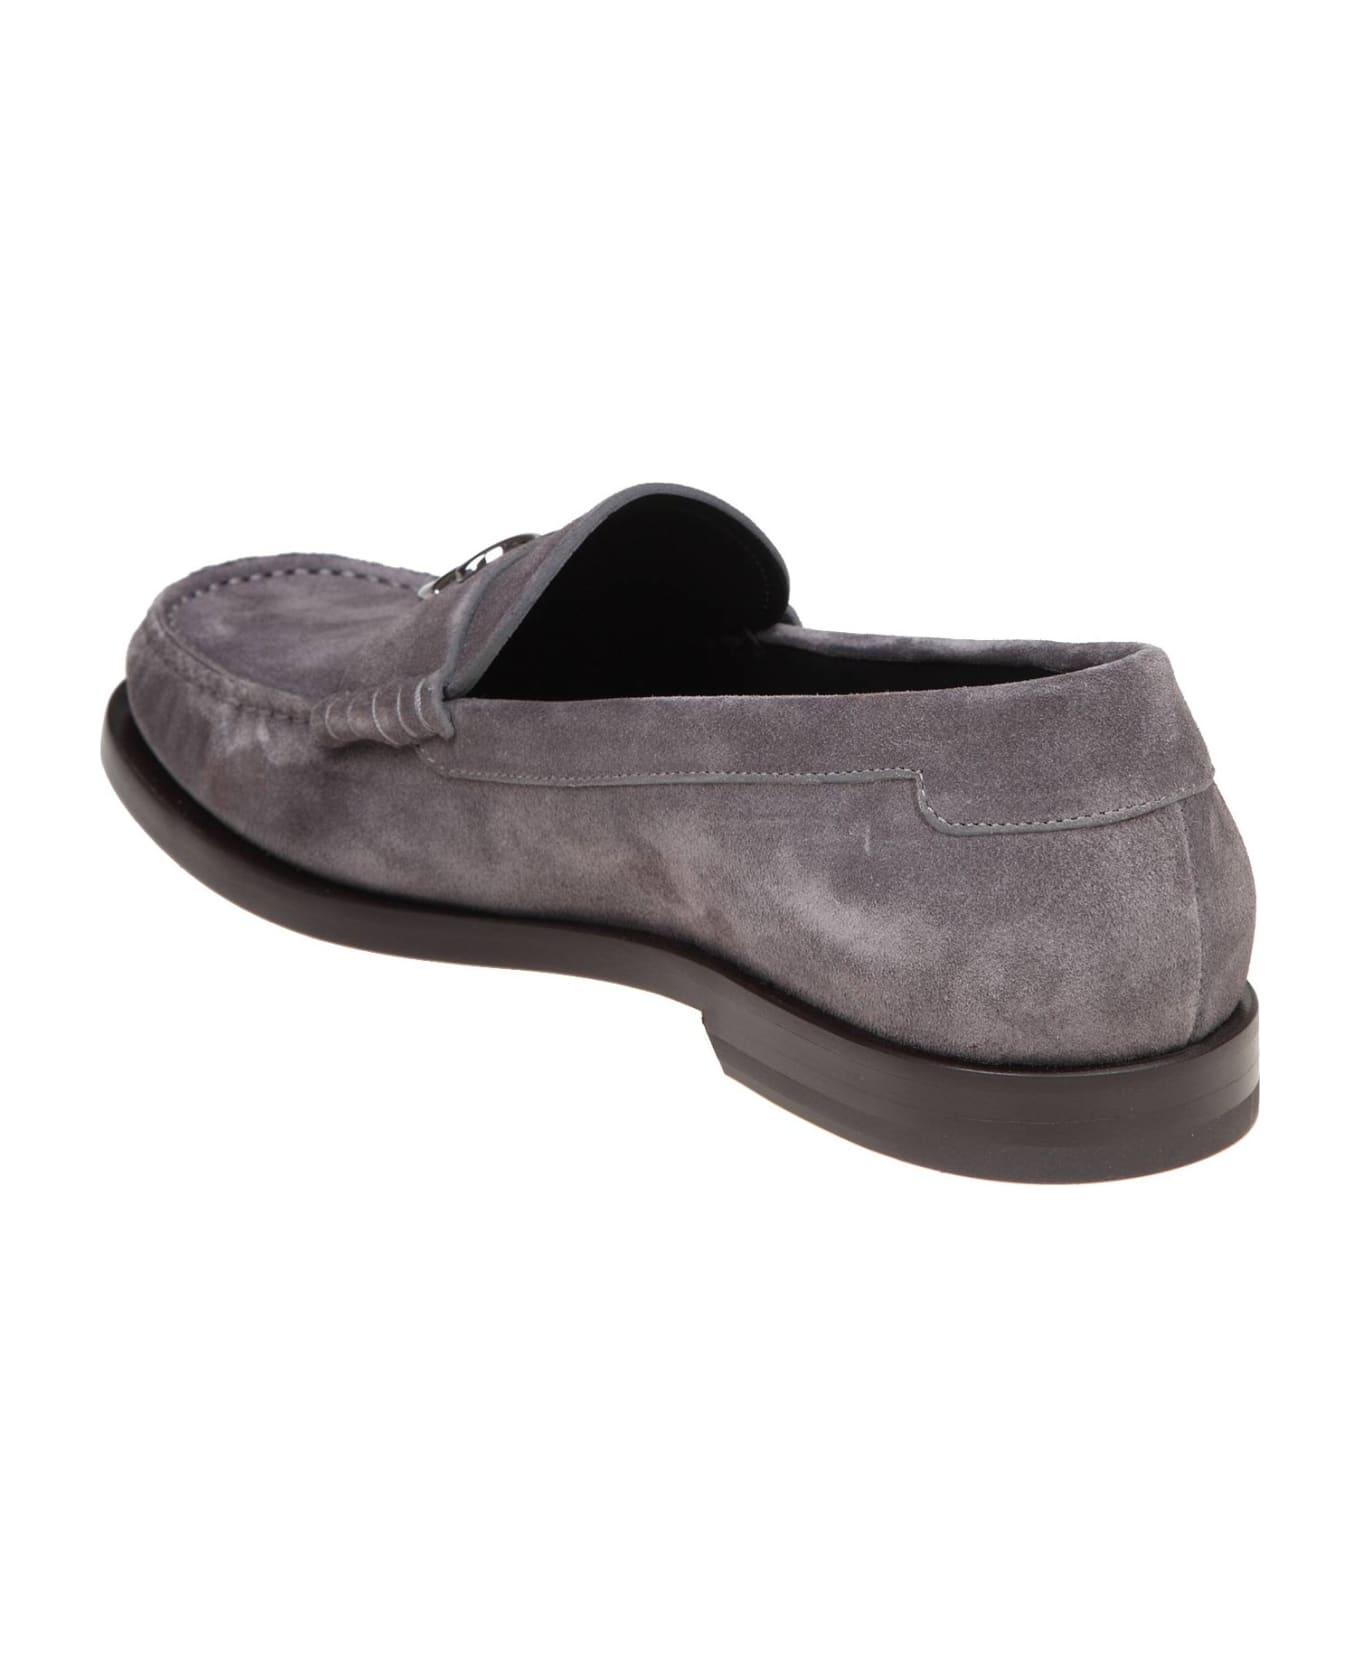 Dolce & Gabbana Suede Loafers With Dg Logo - Grey